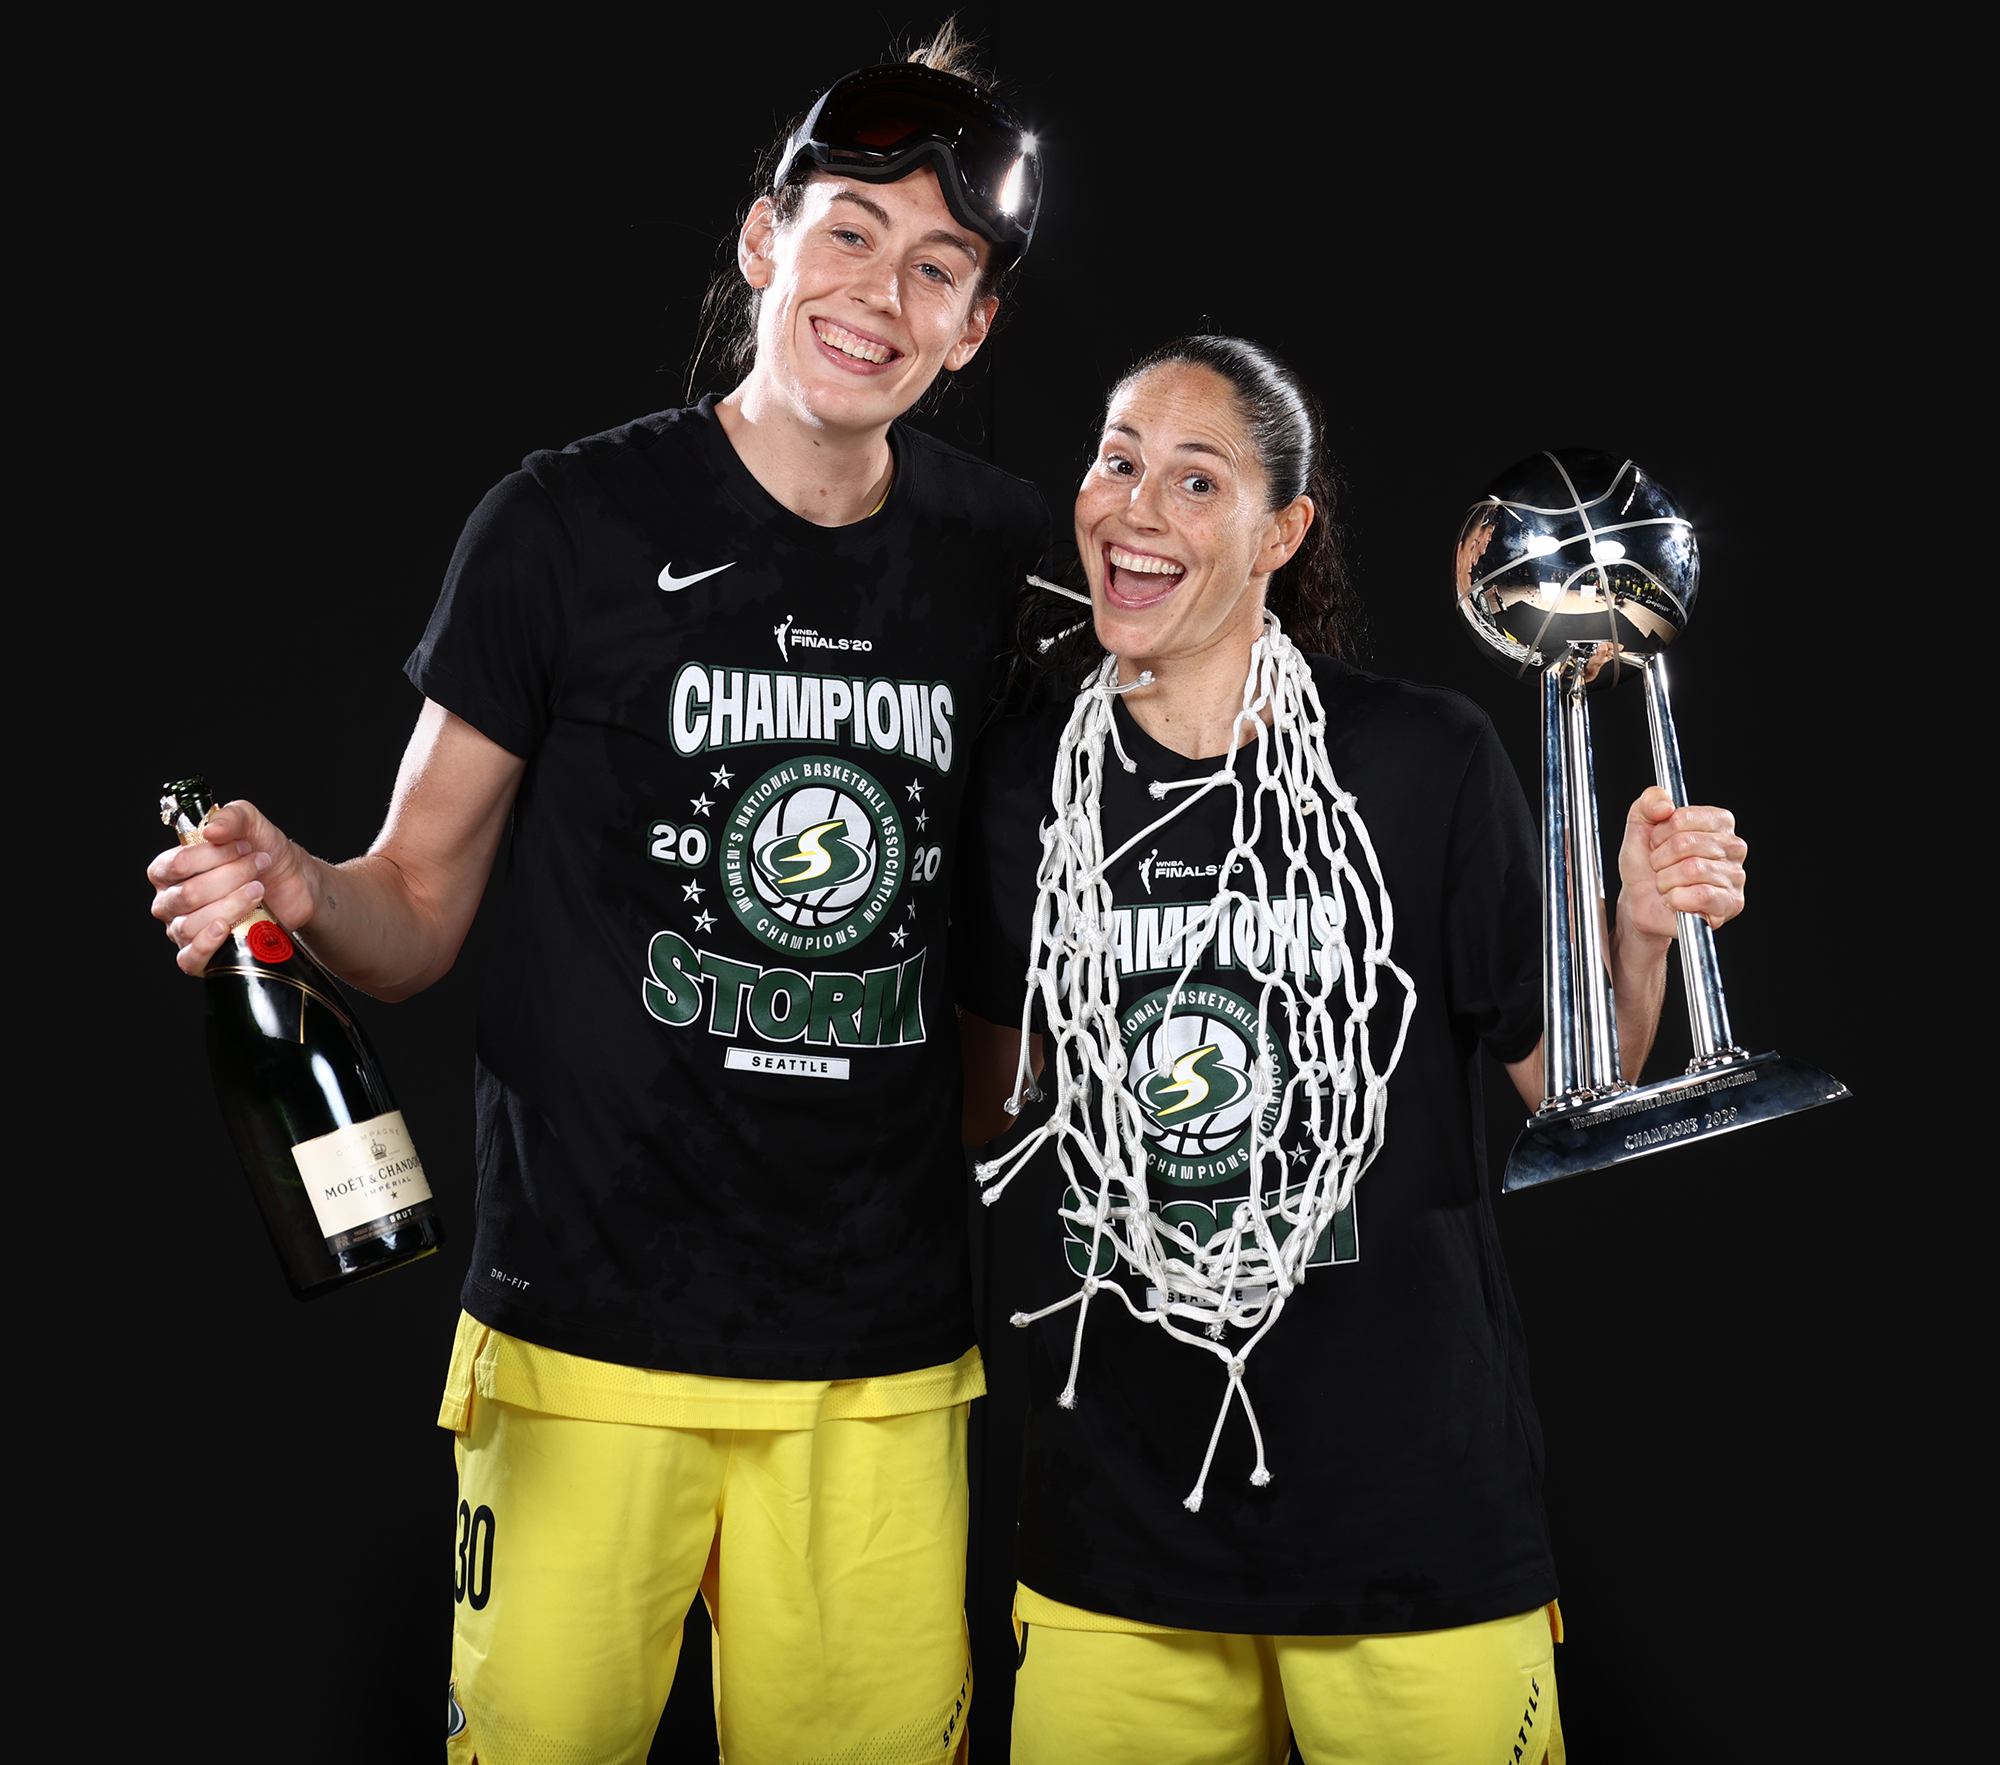 PALMETTO, FL - OCTOBER 6: Breanna Stewart #30 and Sue Bird #10 of the Seattle Storm poses for a portrait with the WNBA Championship Trophy after winning Game 3 of the 2020 WNBA Finals against the Las Vegas Aces on October 6, 2020 at Feld Entertainment Center in Palmetto, Florida.